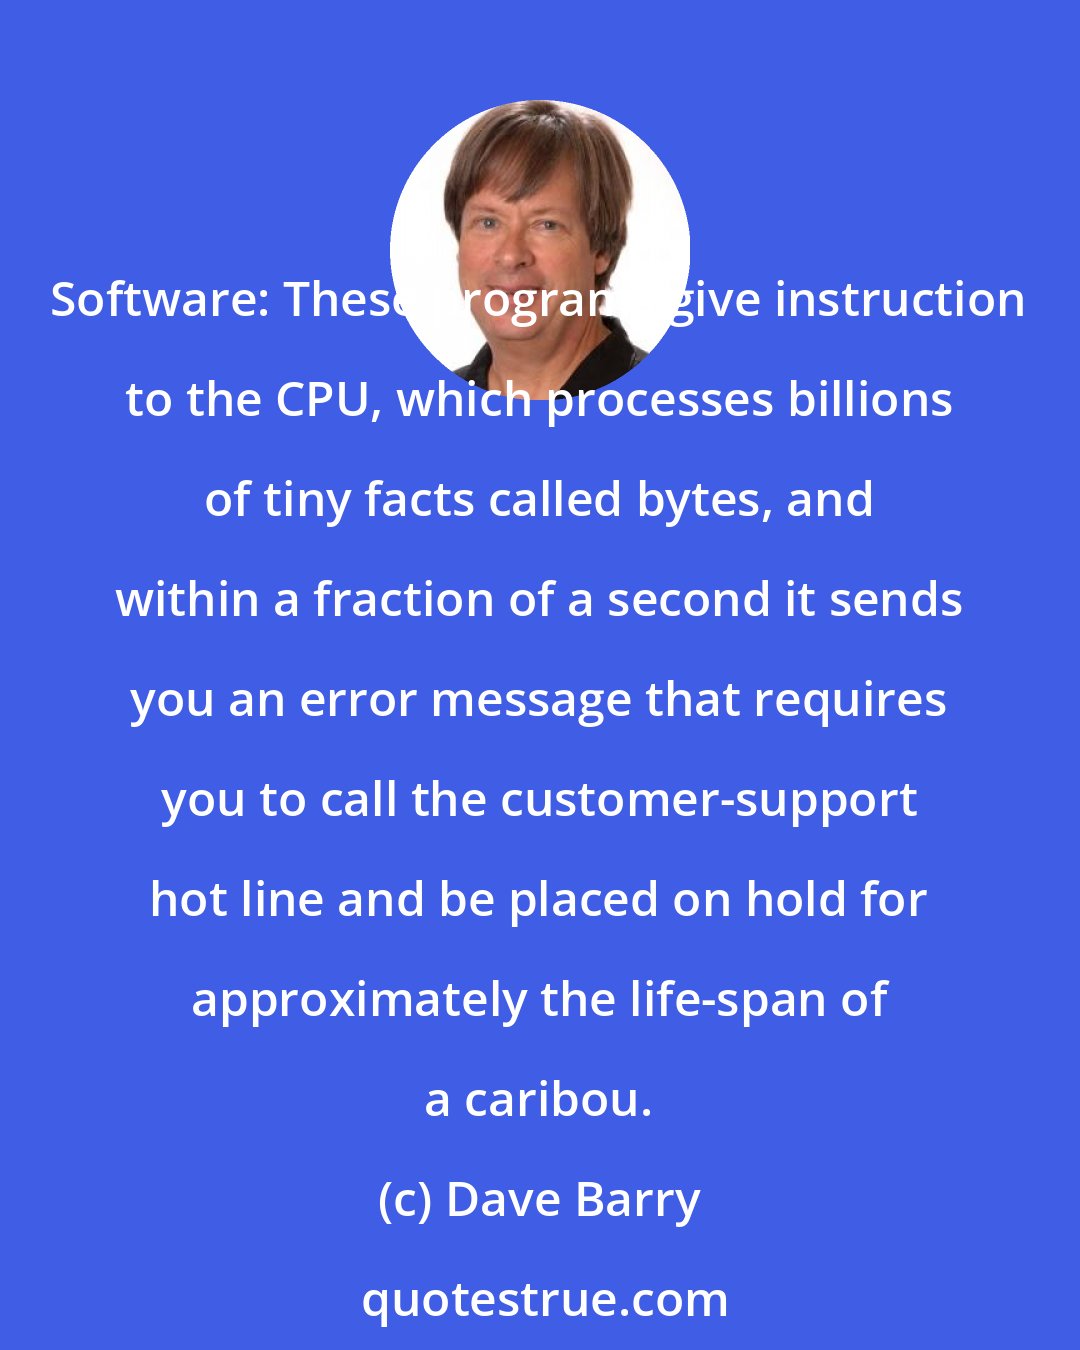 Dave Barry: Software: These programs give instruction to the CPU, which processes billions of tiny facts called bytes, and within a fraction of a second it sends you an error message that requires you to call the customer-support hot line and be placed on hold for approximately the life-span of a caribou.